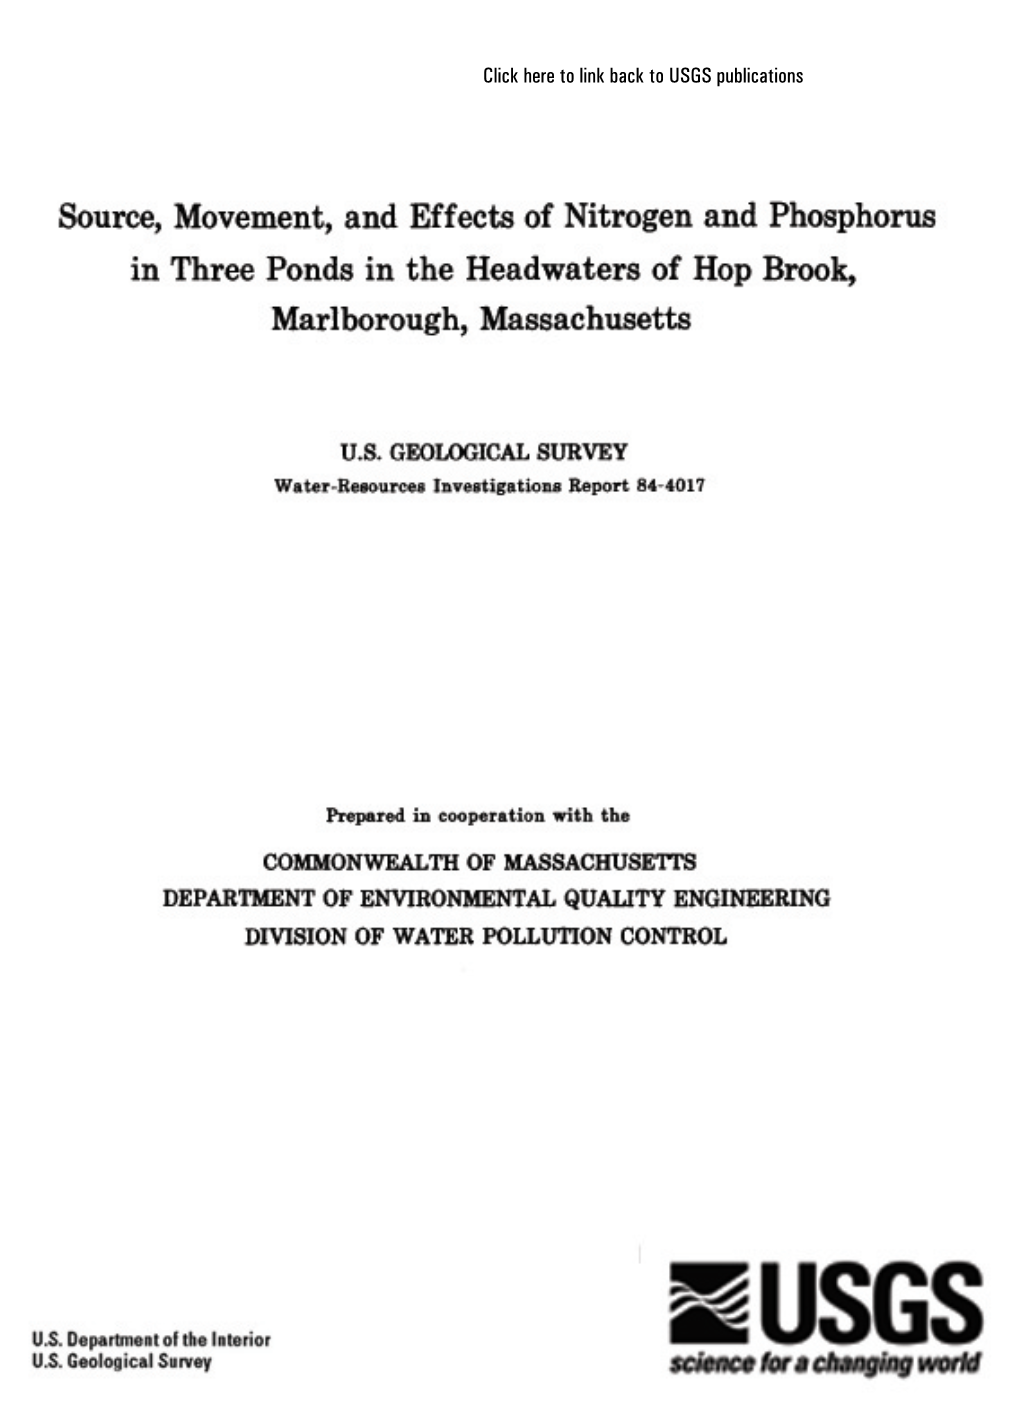 Click Here to Link Back to USGS Publications